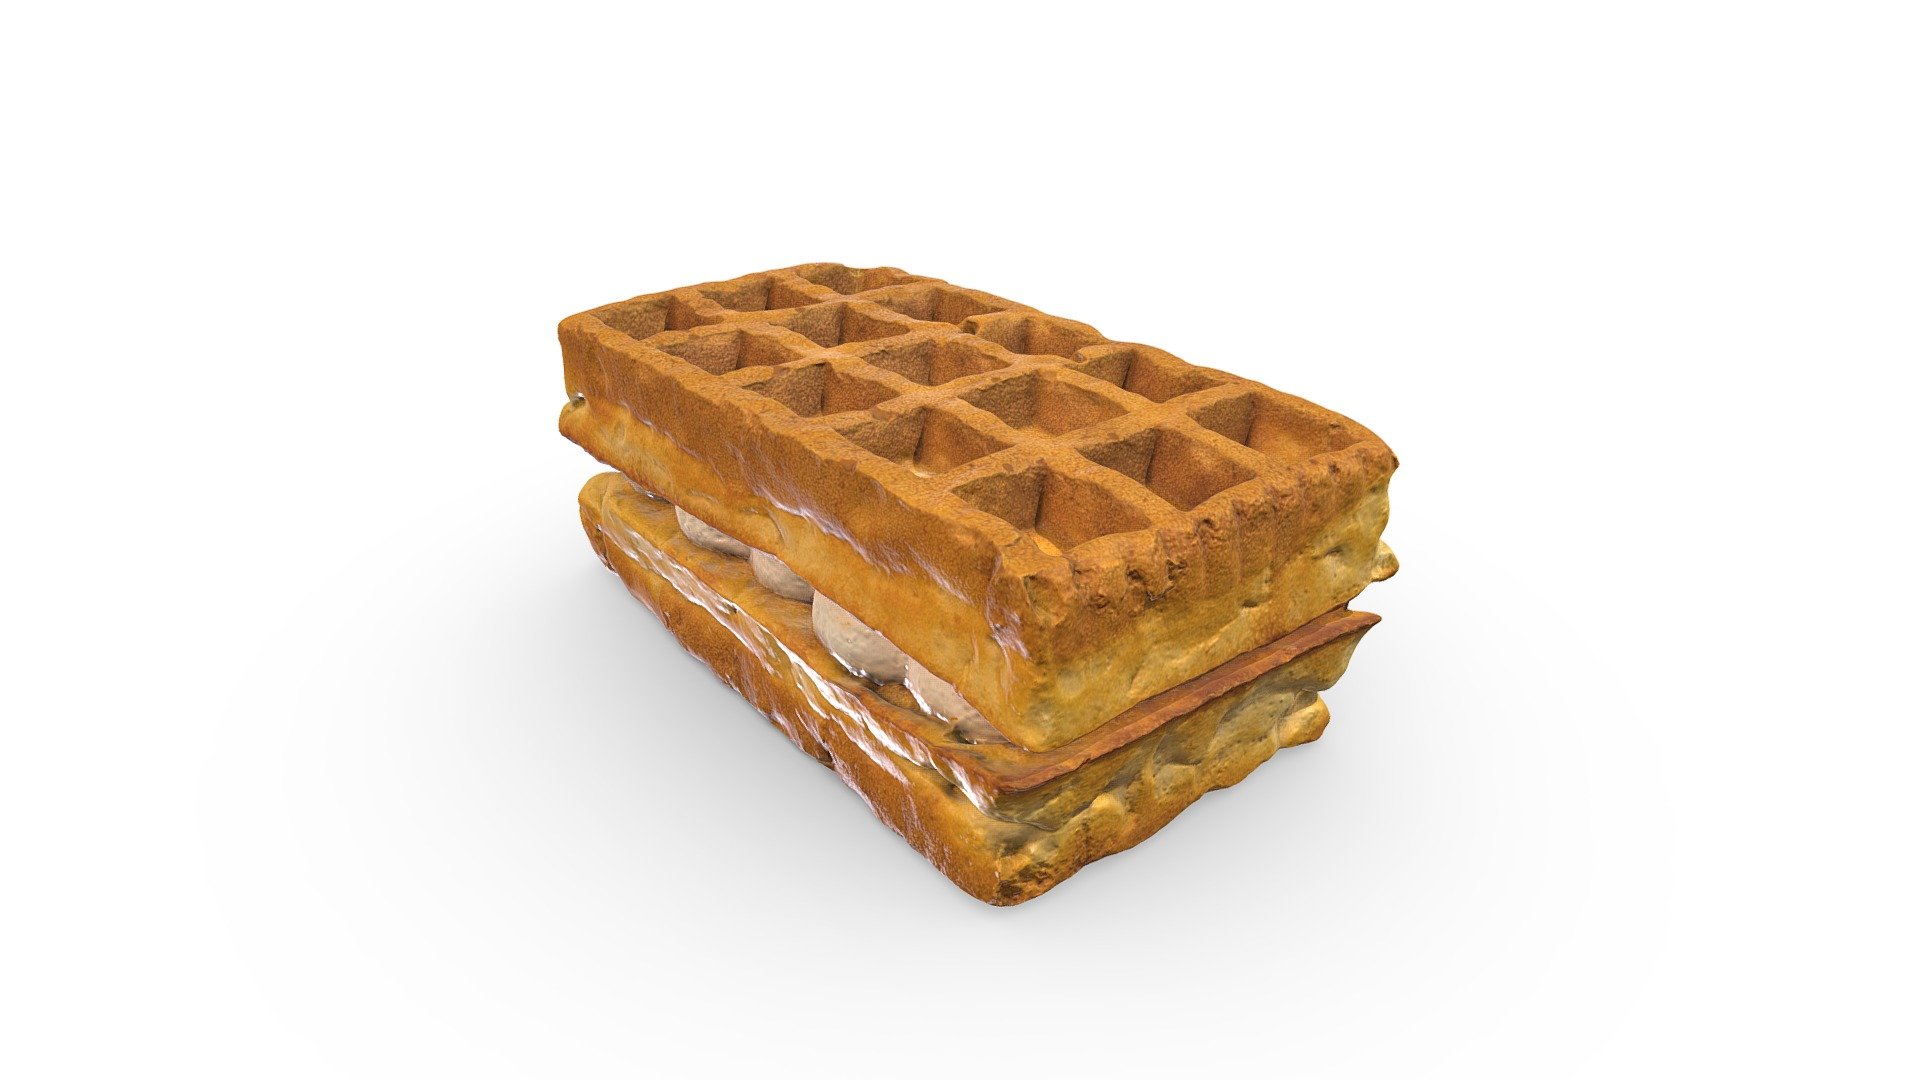 High-poly viennese waffle photogrammetry scan. PBR texture maps 4096x4096 px. resolution for metallic or specular workflow. Scan from real food, high-poly 3D model, 4K resolution textures.

Additional file contains low-poly 3d model version, game-ready in real time 3d model